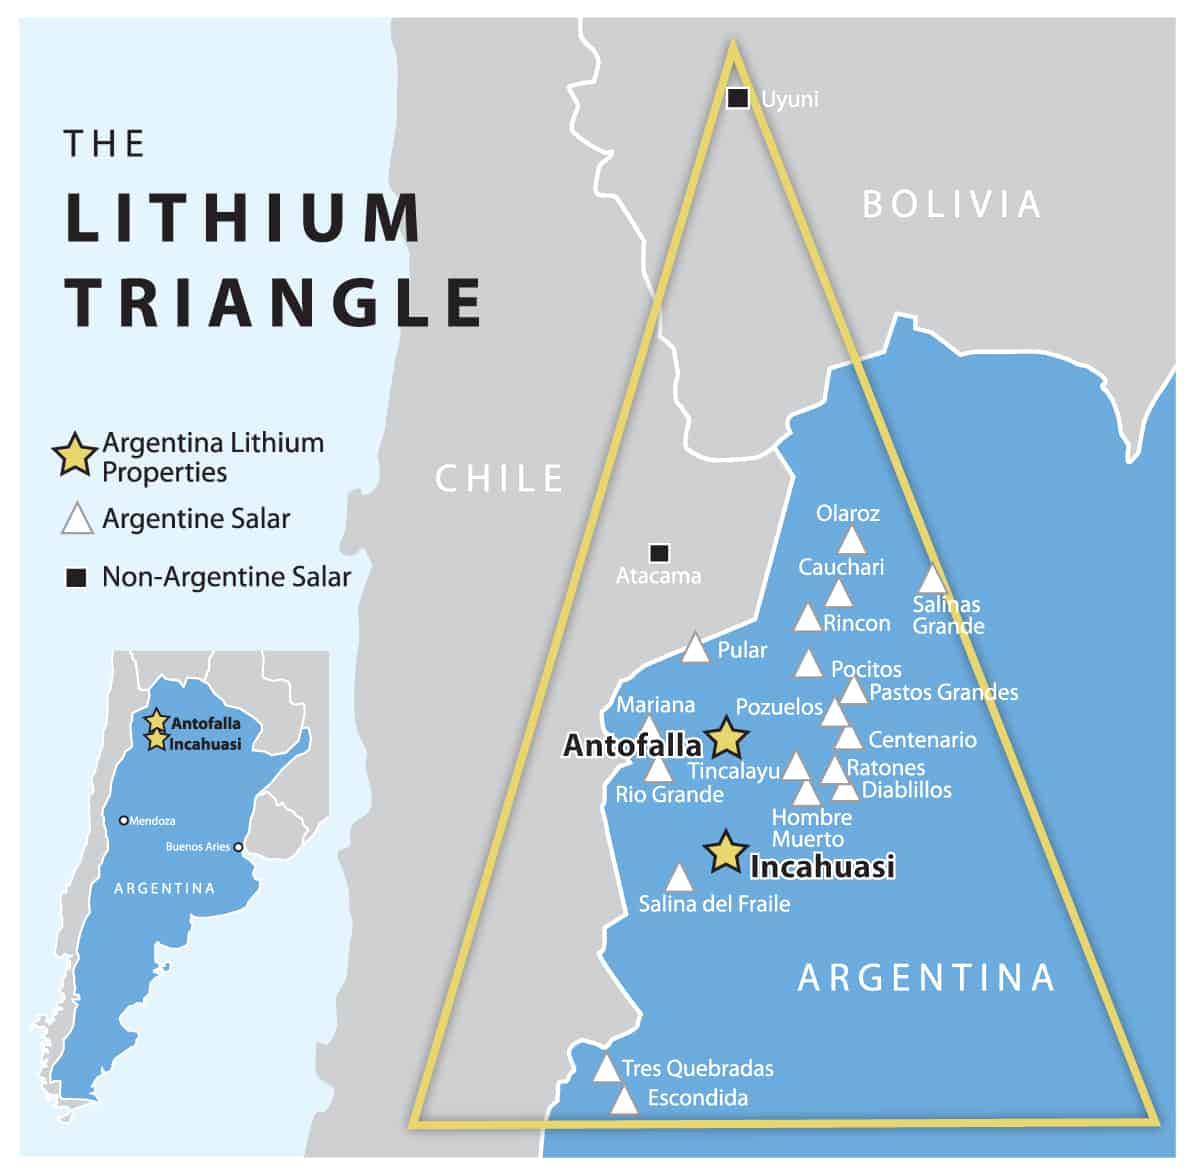 The lithium triangle in South America. (Photo Internet reproduction)